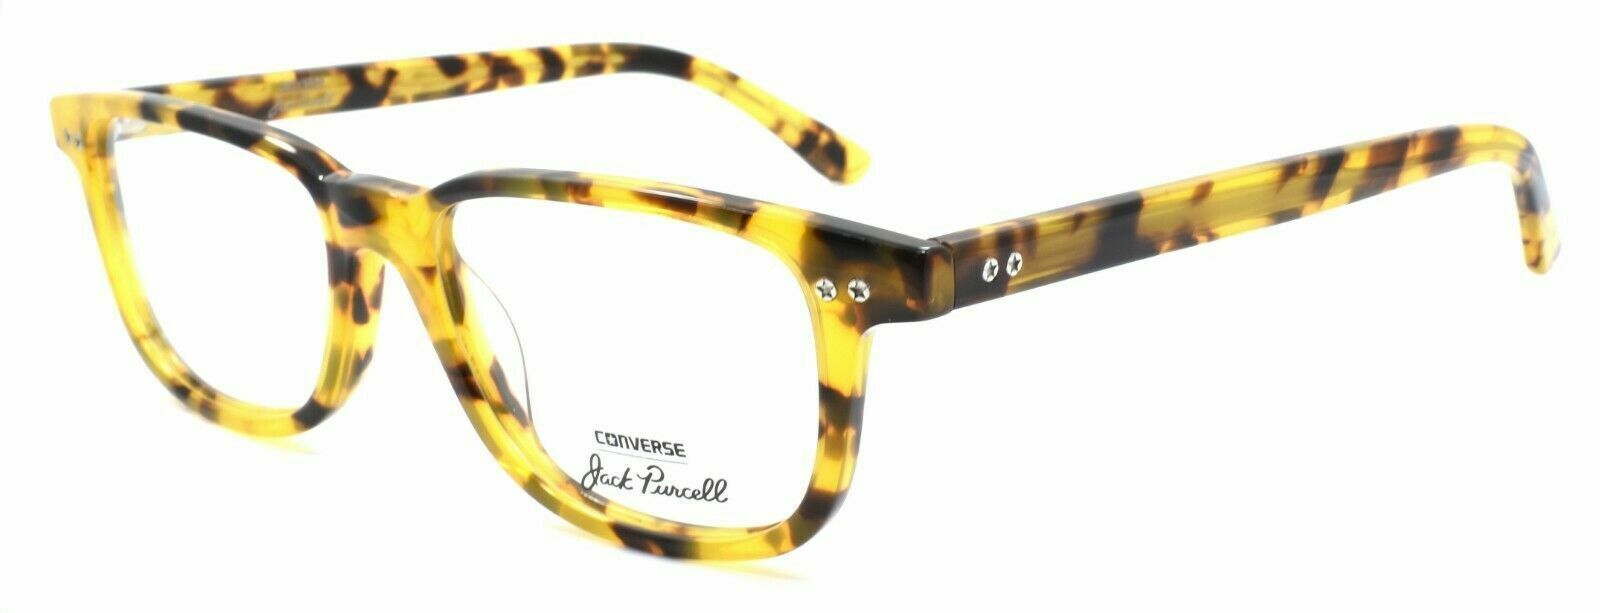 NEW AUTHENTIC CONVERSE JACK PURCELL P012UF Tokyo Tortoise Eyeglasses 52mm 17 150